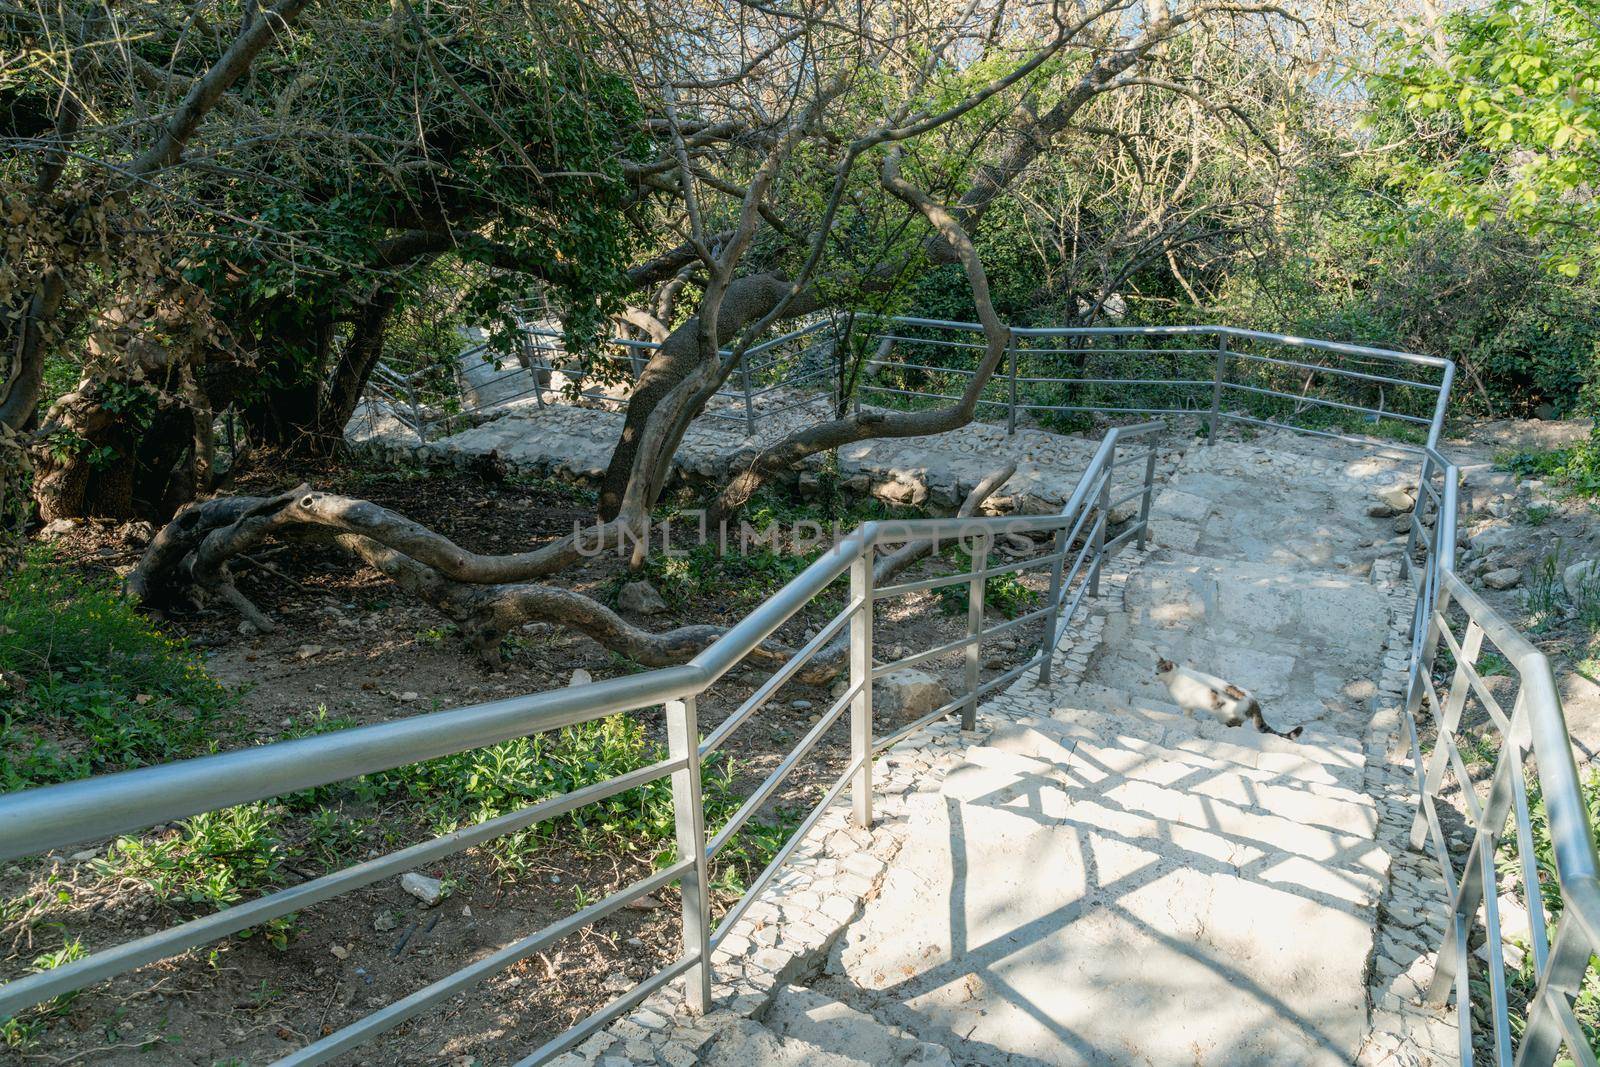 A new stone staircase of 800 steps to Jasper Beach, built in the spring of 2020. The reserve on the Black Sea. Cape Fiolent, Crimea Peninsula. The concept of unity with nature, outdoor activities. by Matiunina